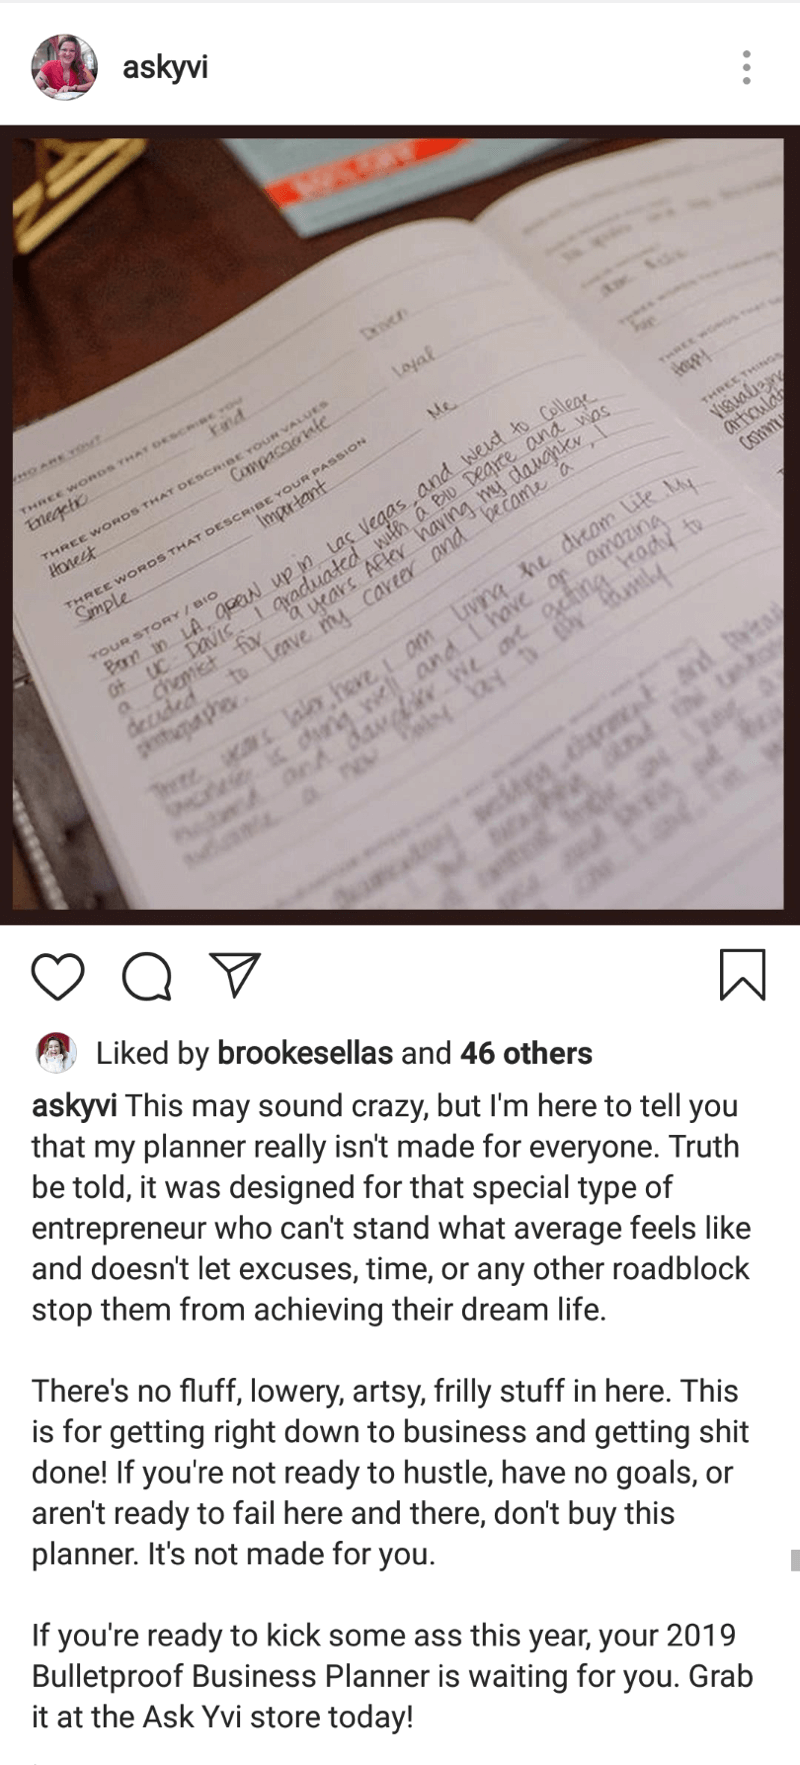 How to write engaging Instagram captions, step 4, divide longer caption into paragraphs example by askyvi